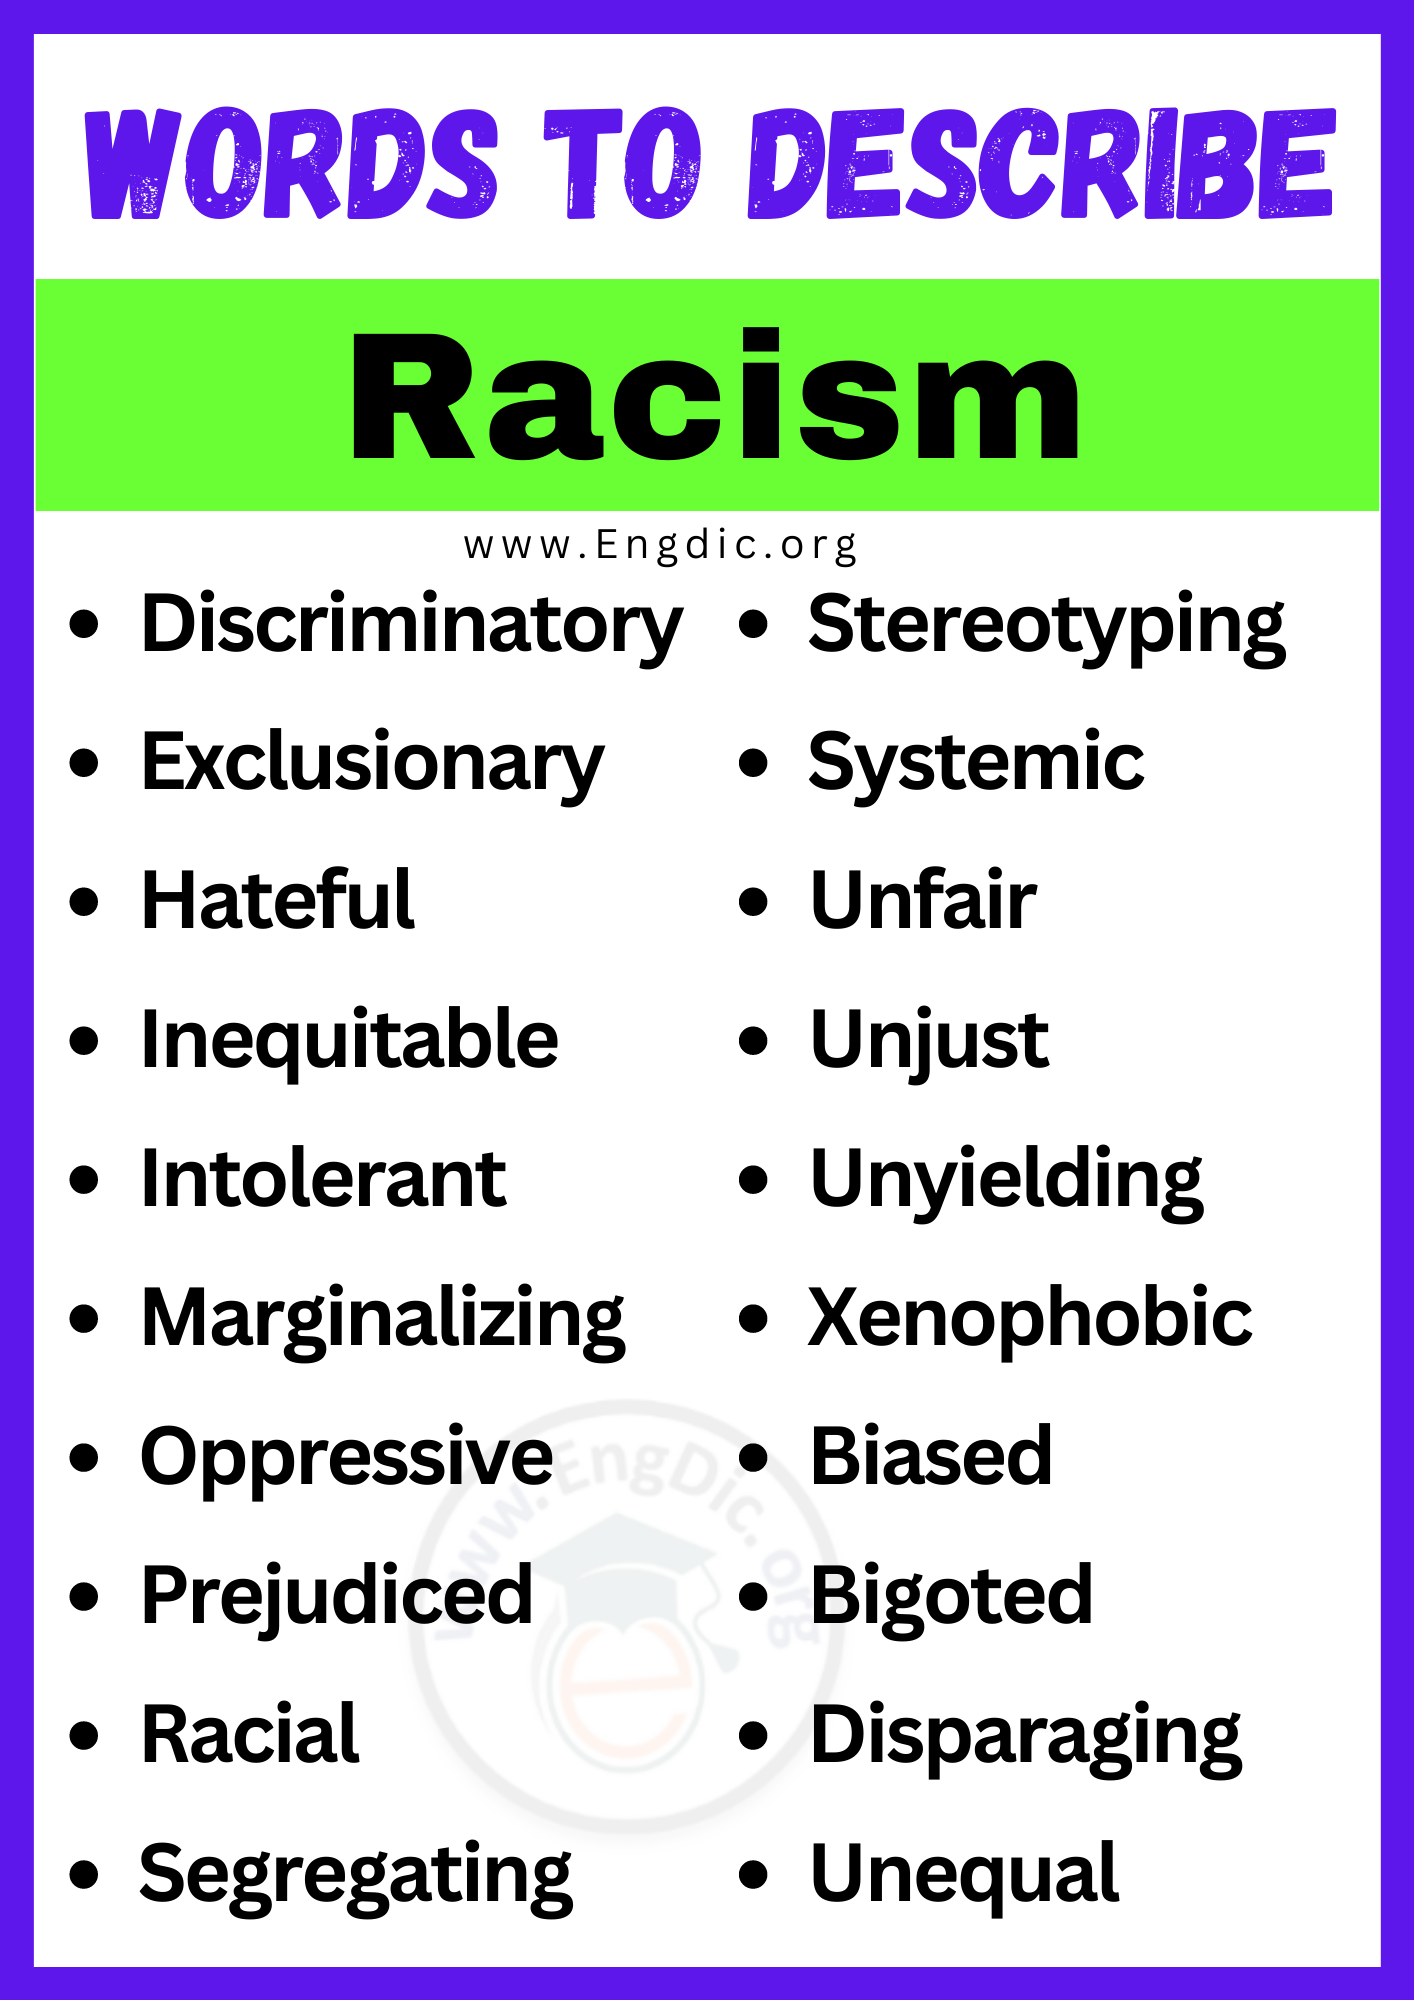 Words to Describe Racism